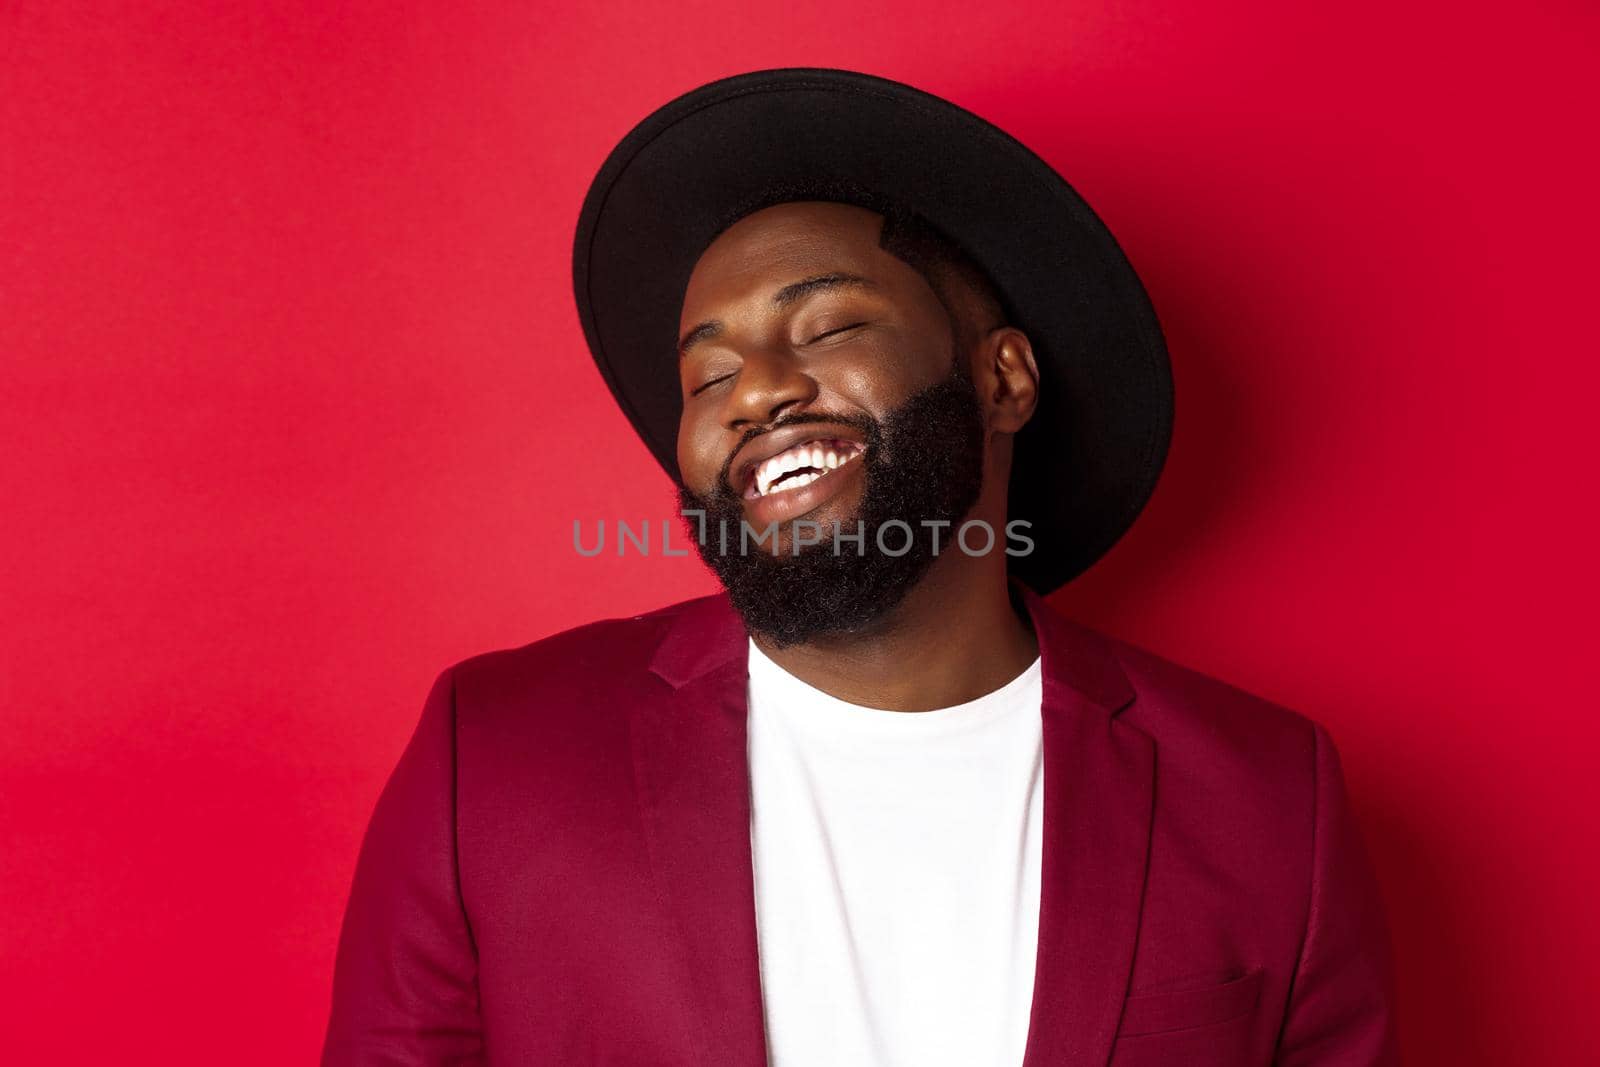 Close-up of handsome Black man with long beard laughing and having fun, looking carefree, standing over red background.